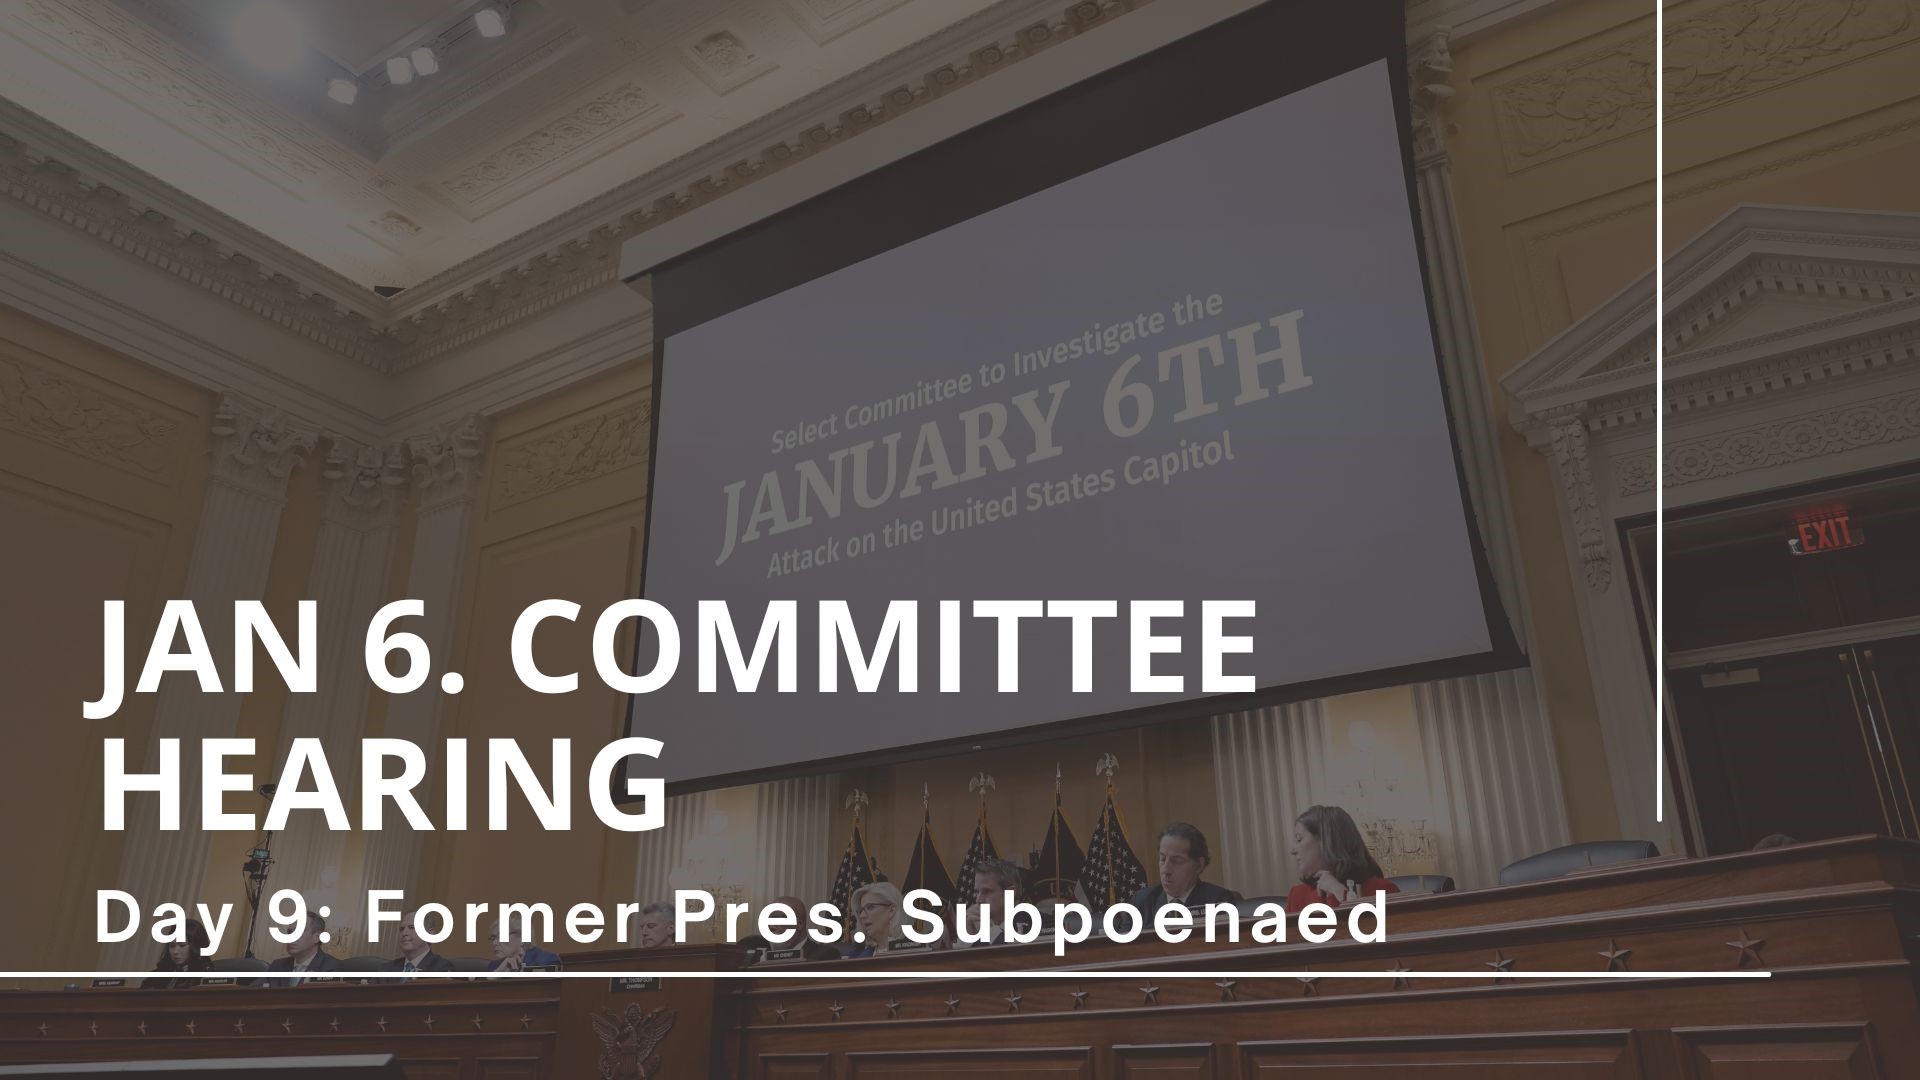 Day 9 of the Jan. 6 hearings, the last following 8 others held in summer of 2022. It featured new evidence and subpoena of former President Trump. (Part 2 of 2)